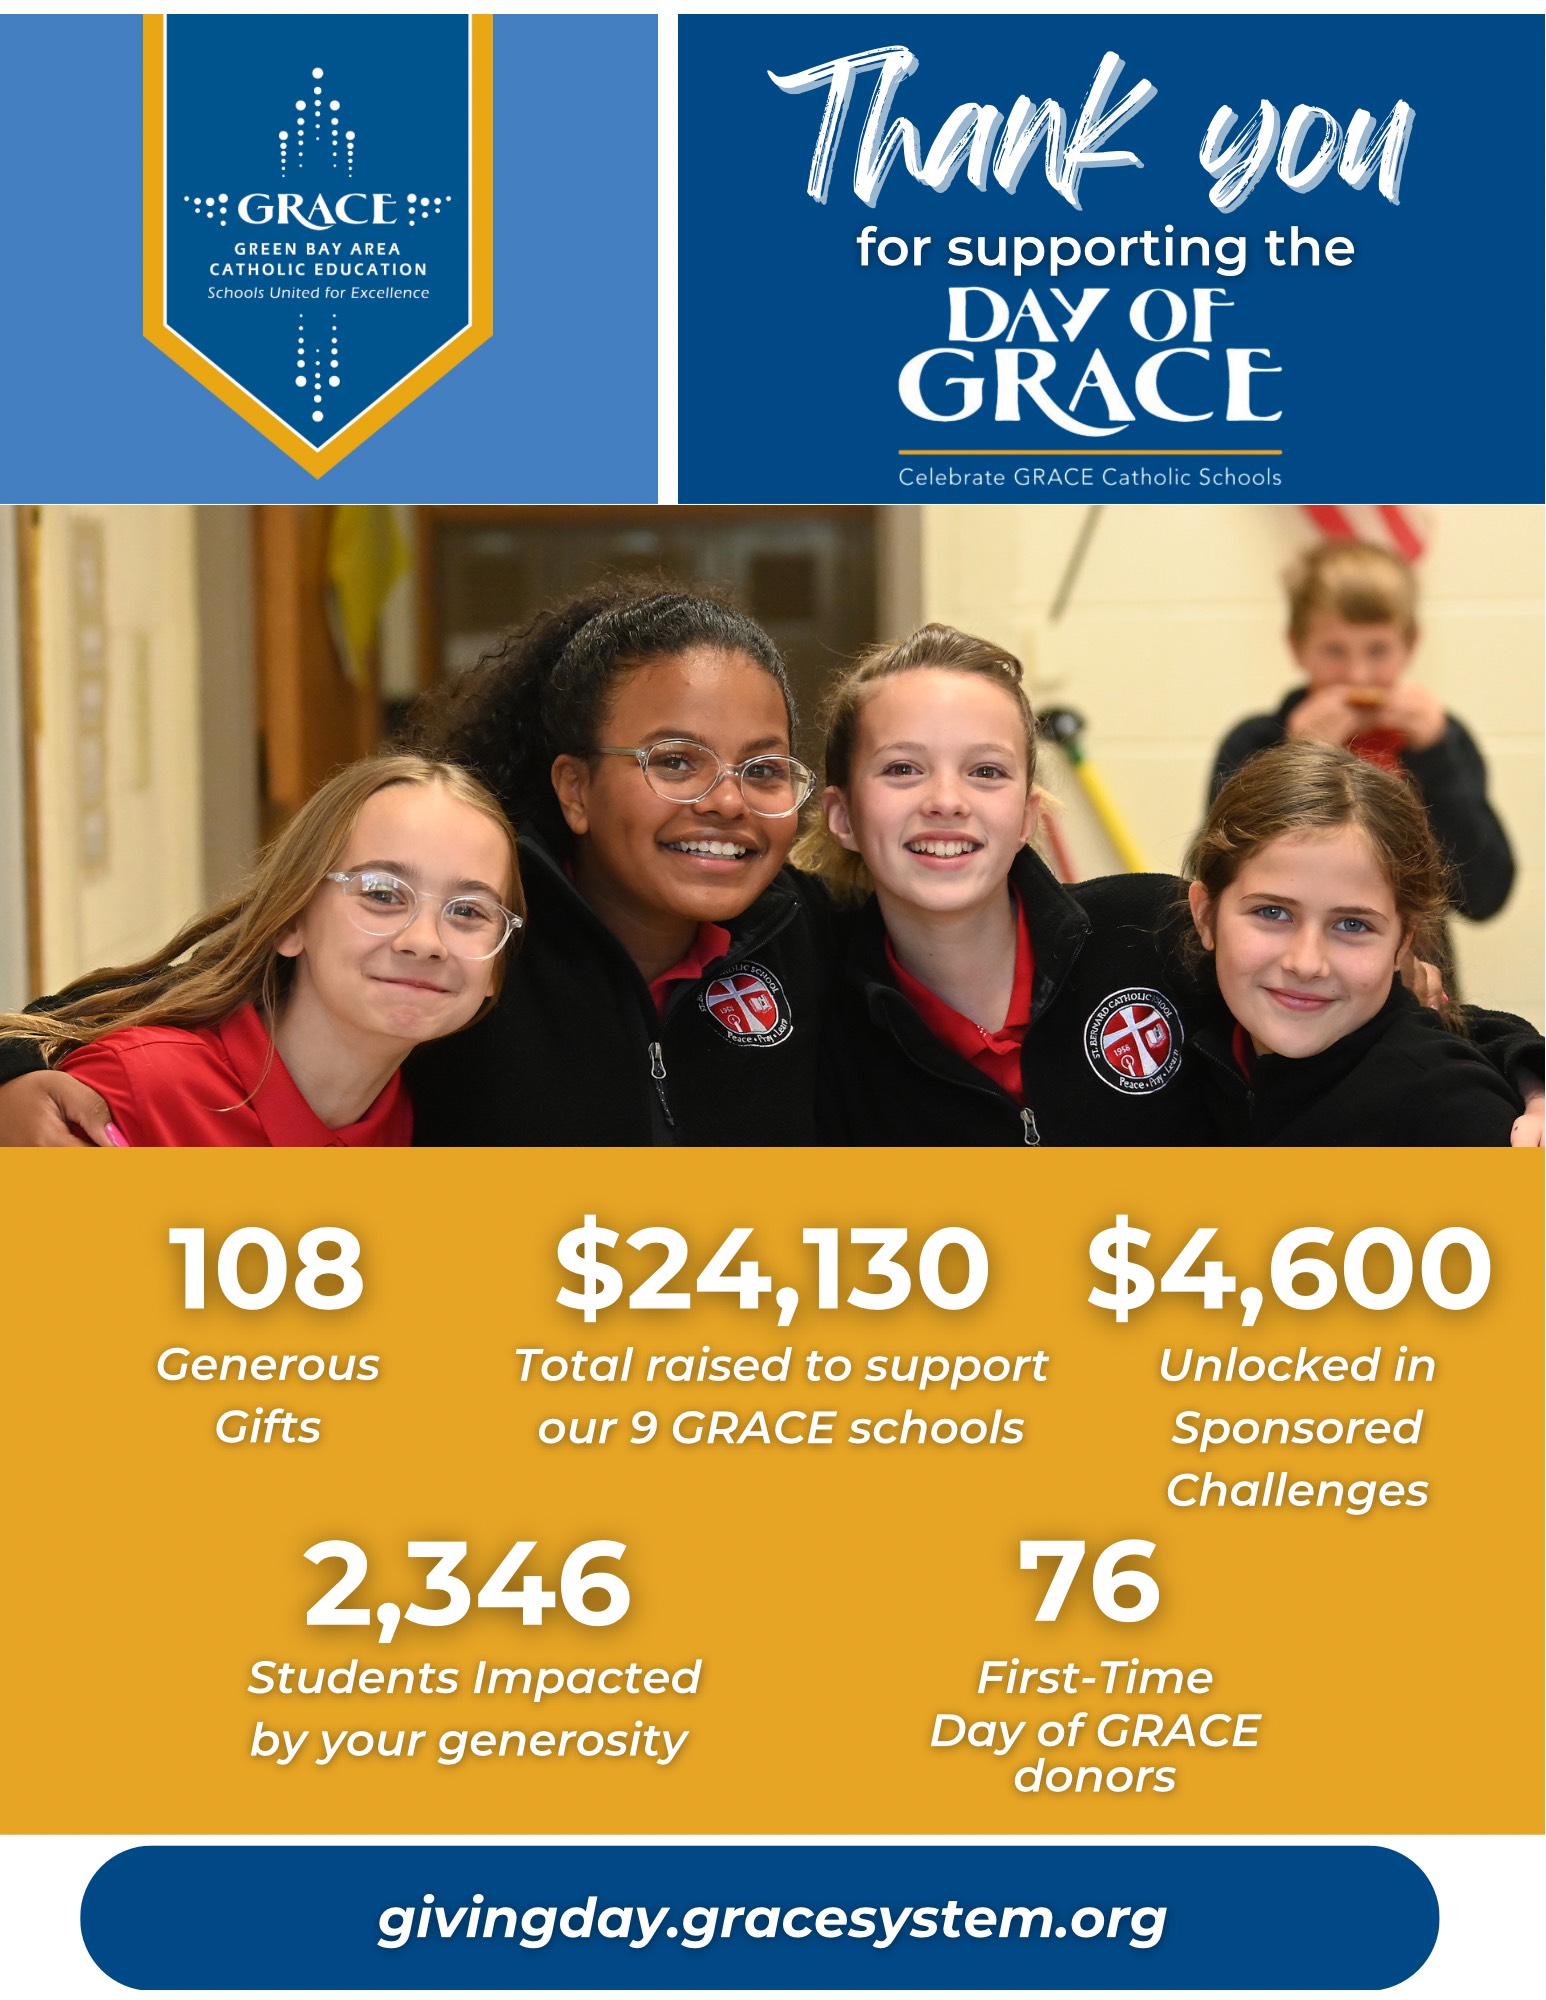 Day of Grace totals